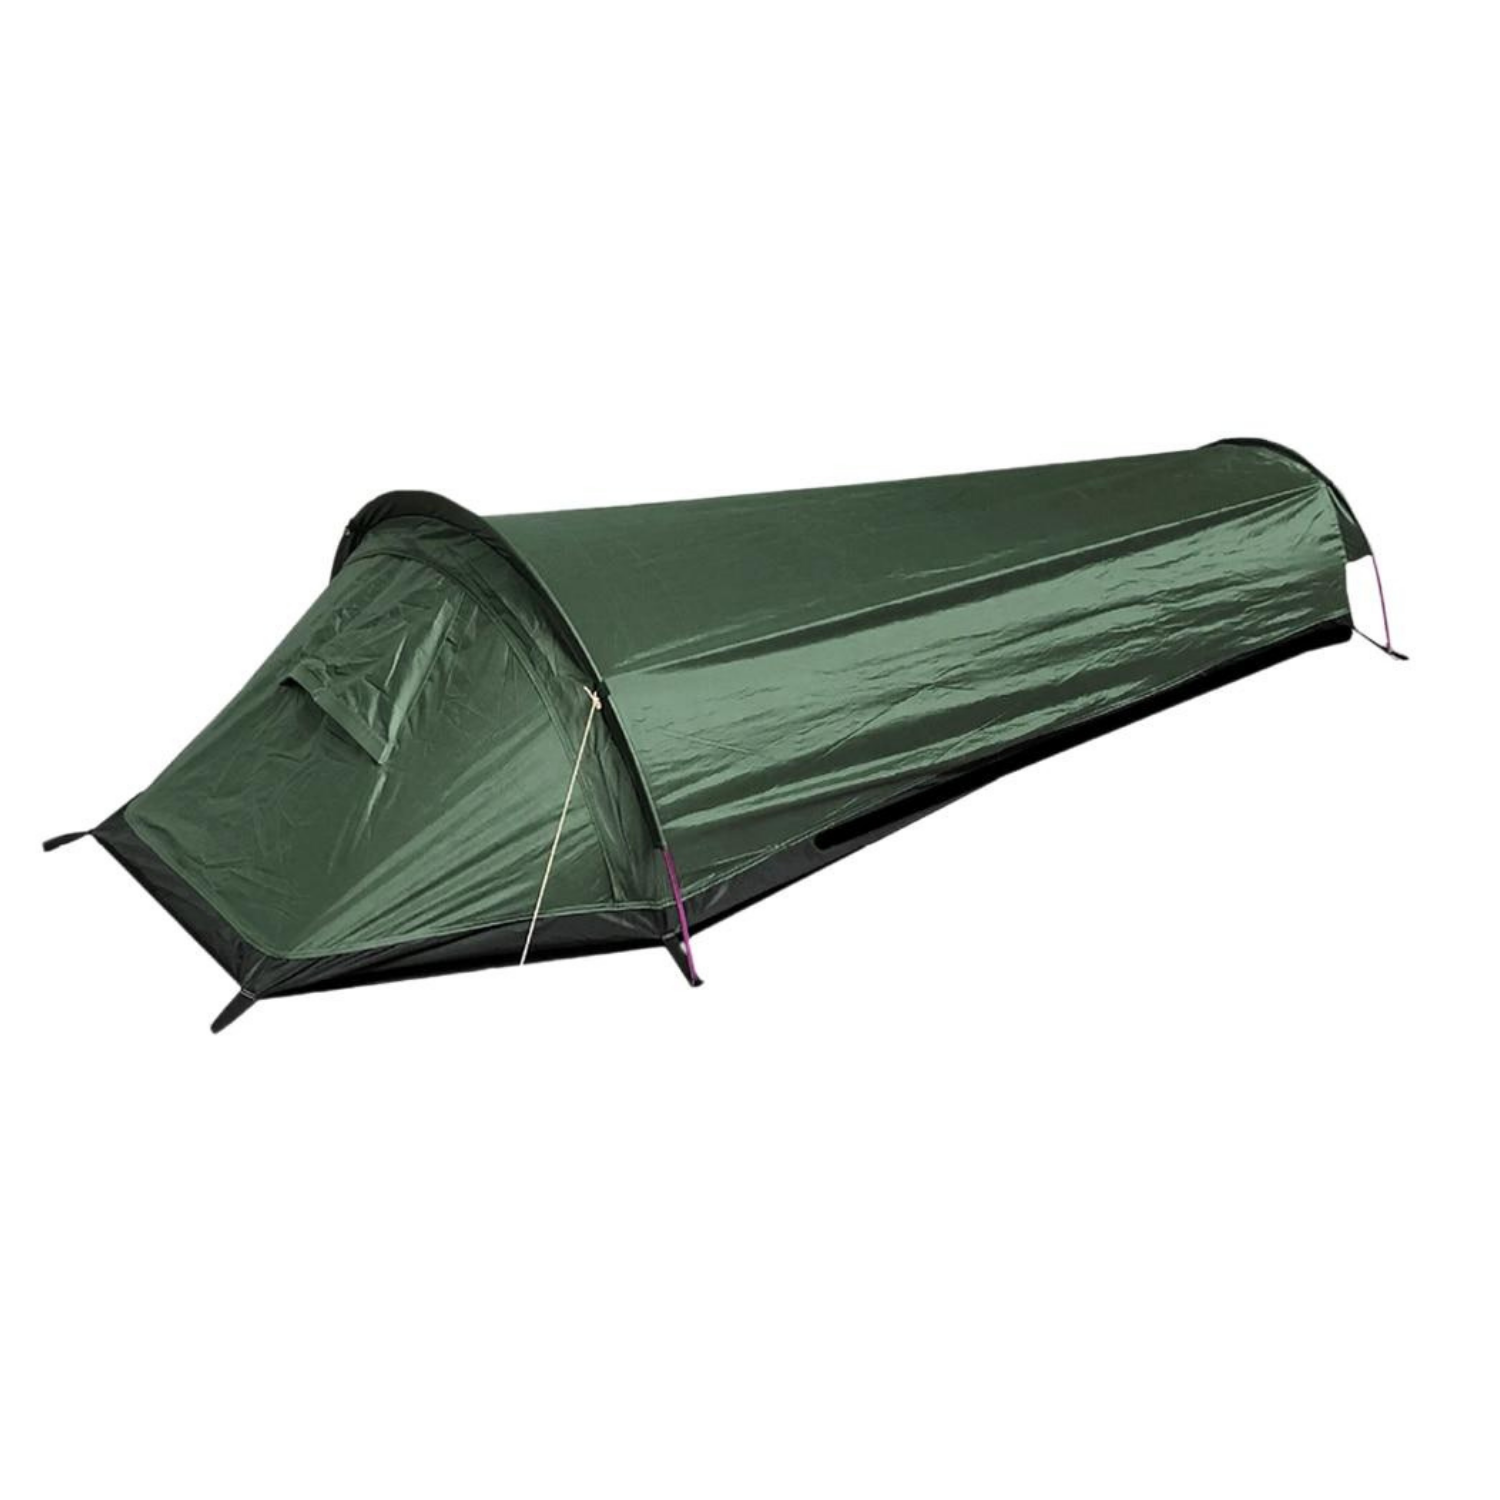 Campmor Nomad Netted Tent - 2.1x2.1